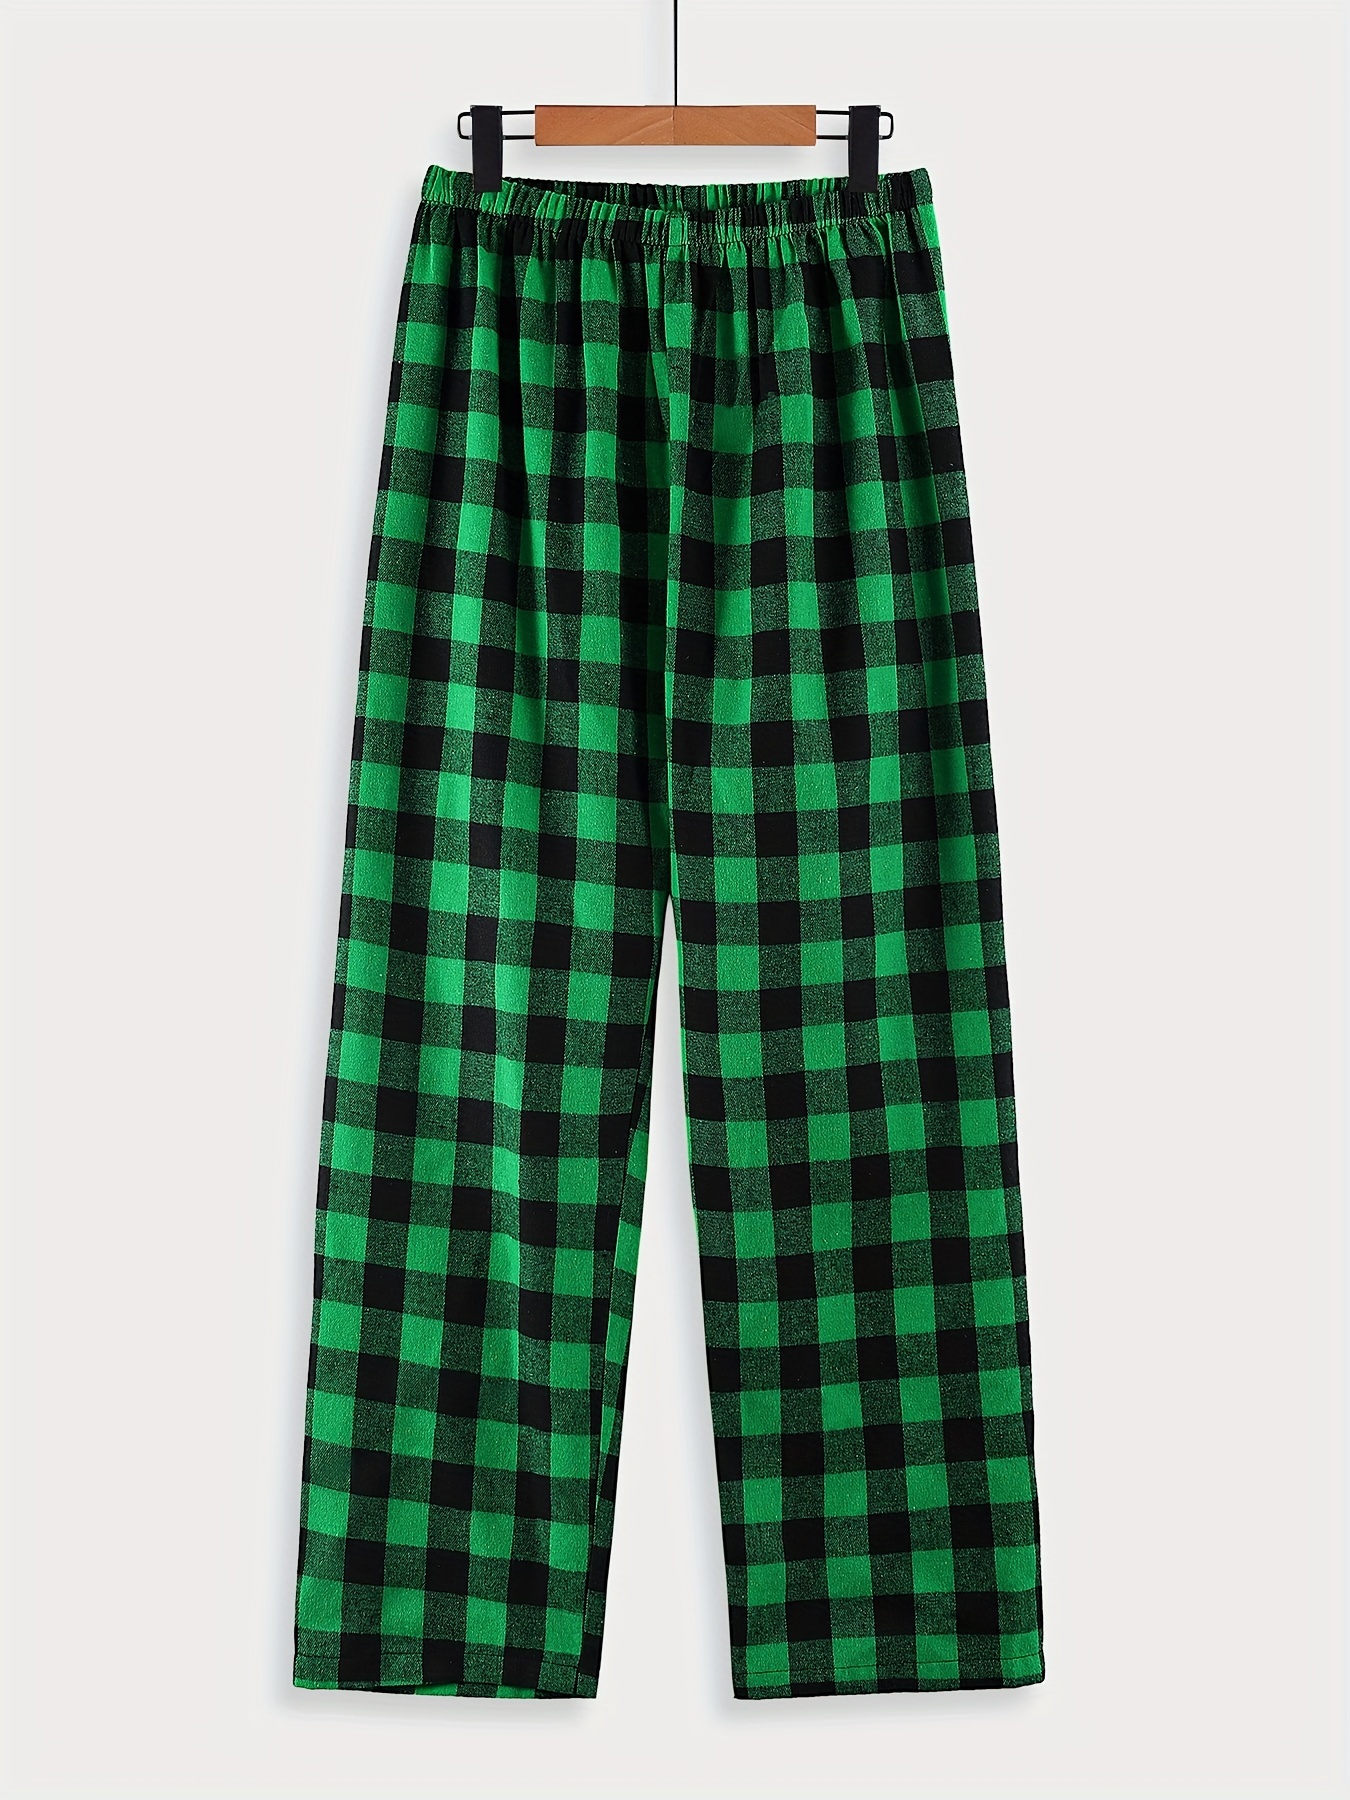 SALE Turquoise & Black Checkered Comfortable Soft Lounge Pajama Pants -  SimplyCuteTees